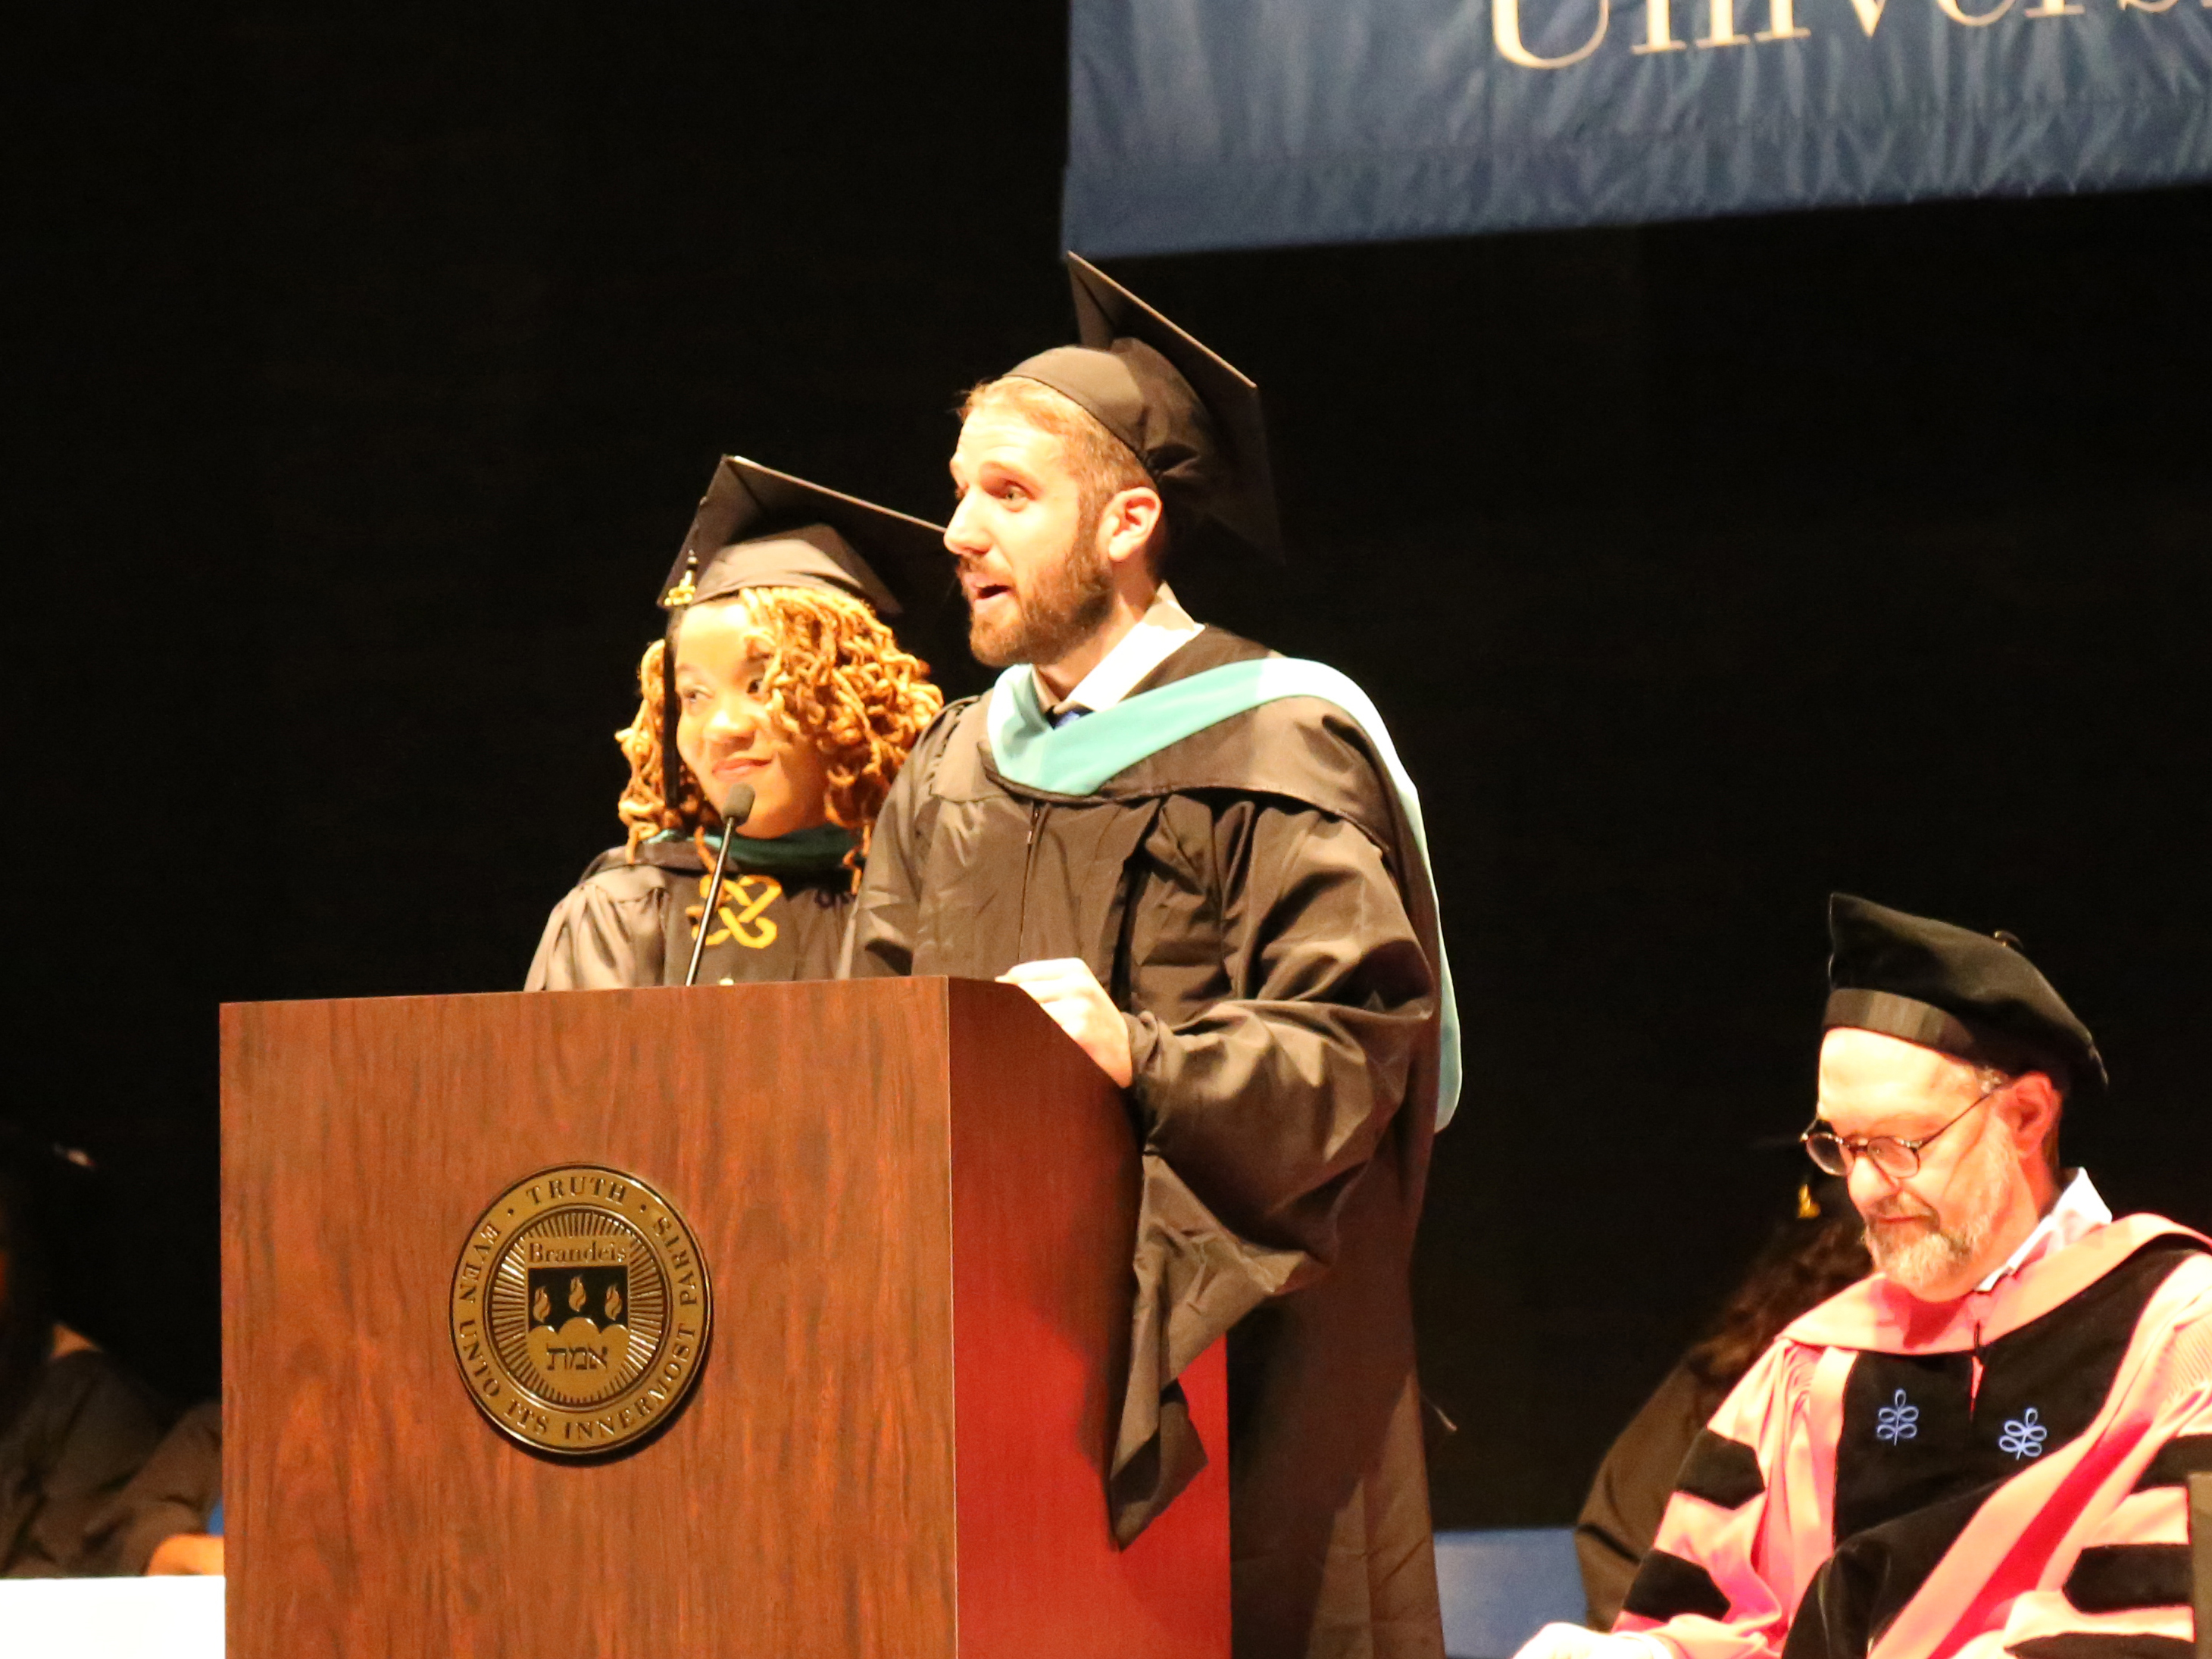 MPP Commencement Speakers: Bria Price, MPP'19, and Nick Young, MPP'19